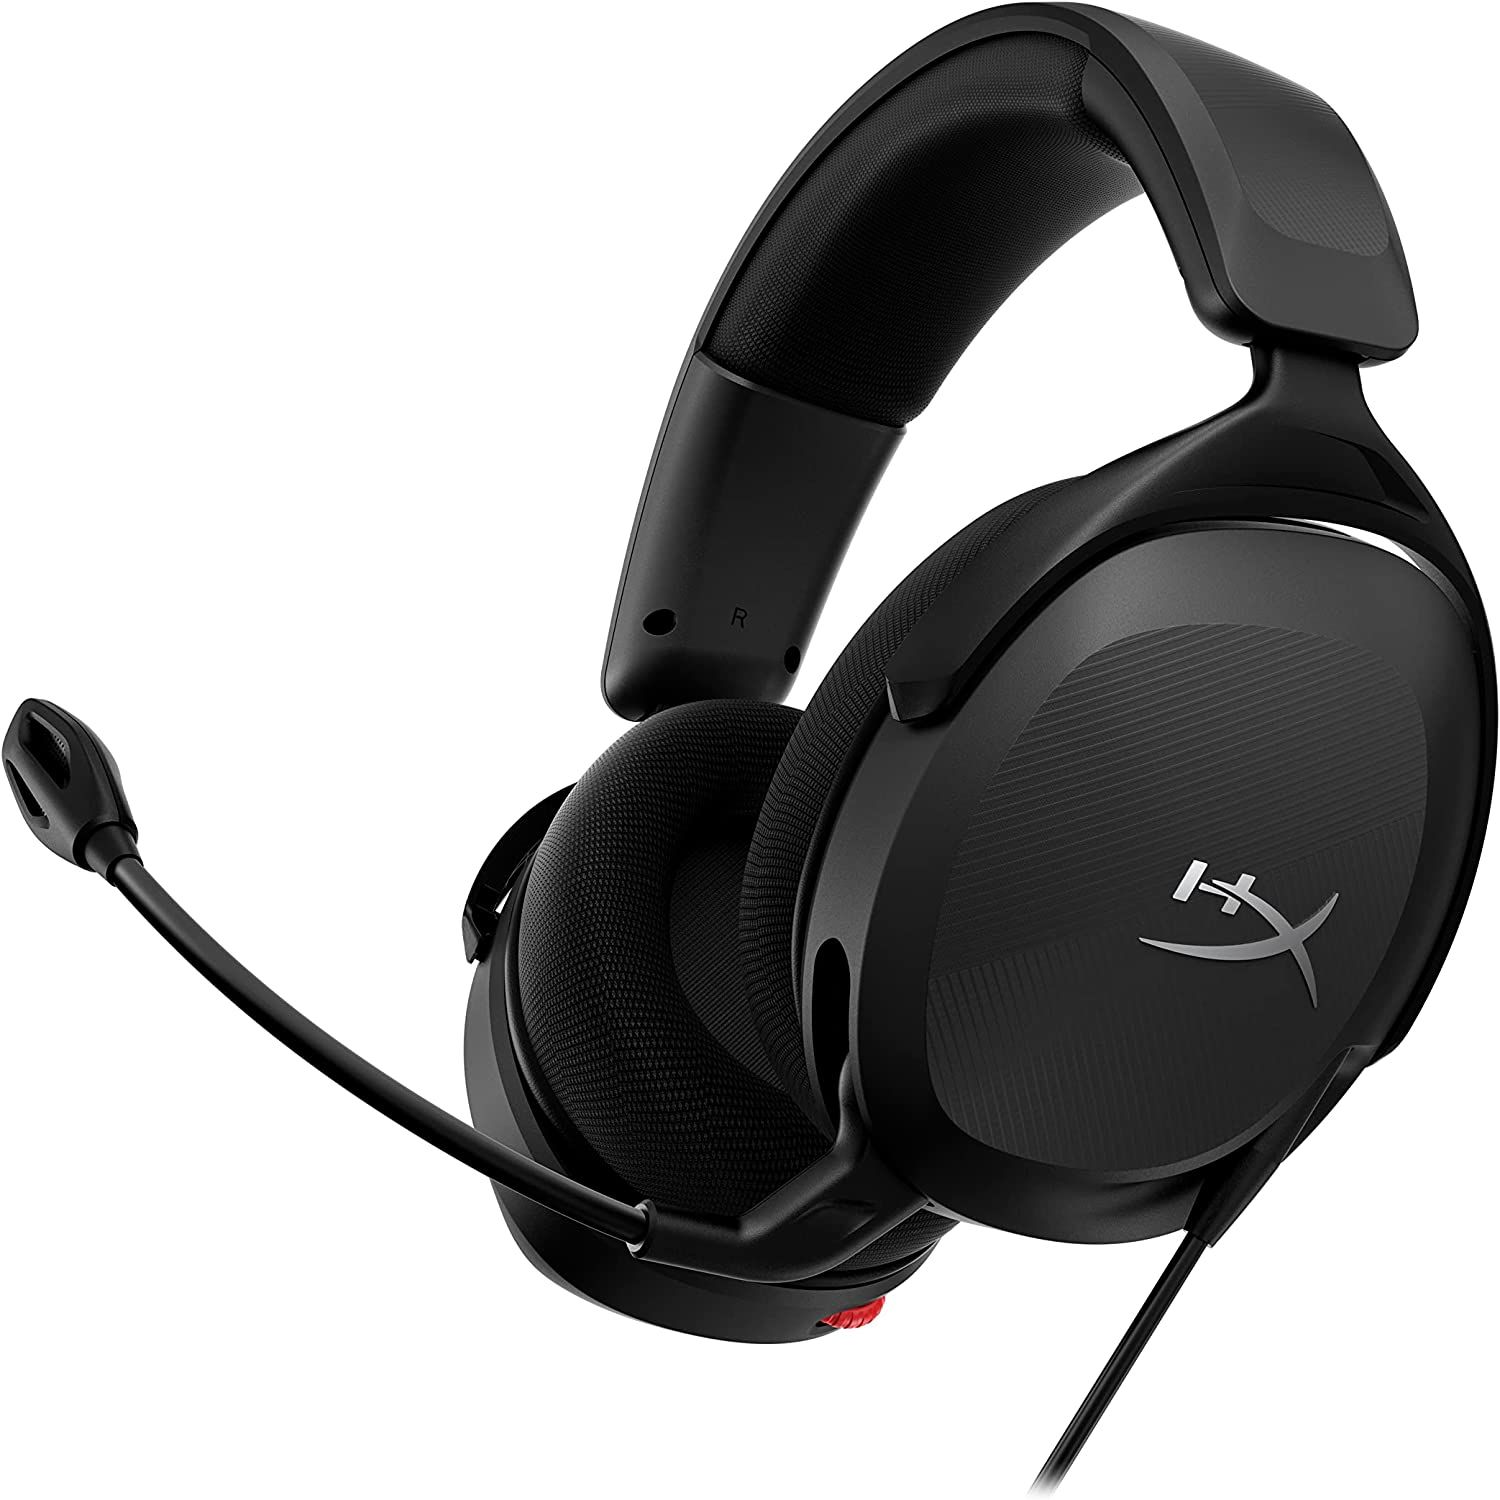 Audio Excellence: Exploring the Best HyperX Headset Models插图4